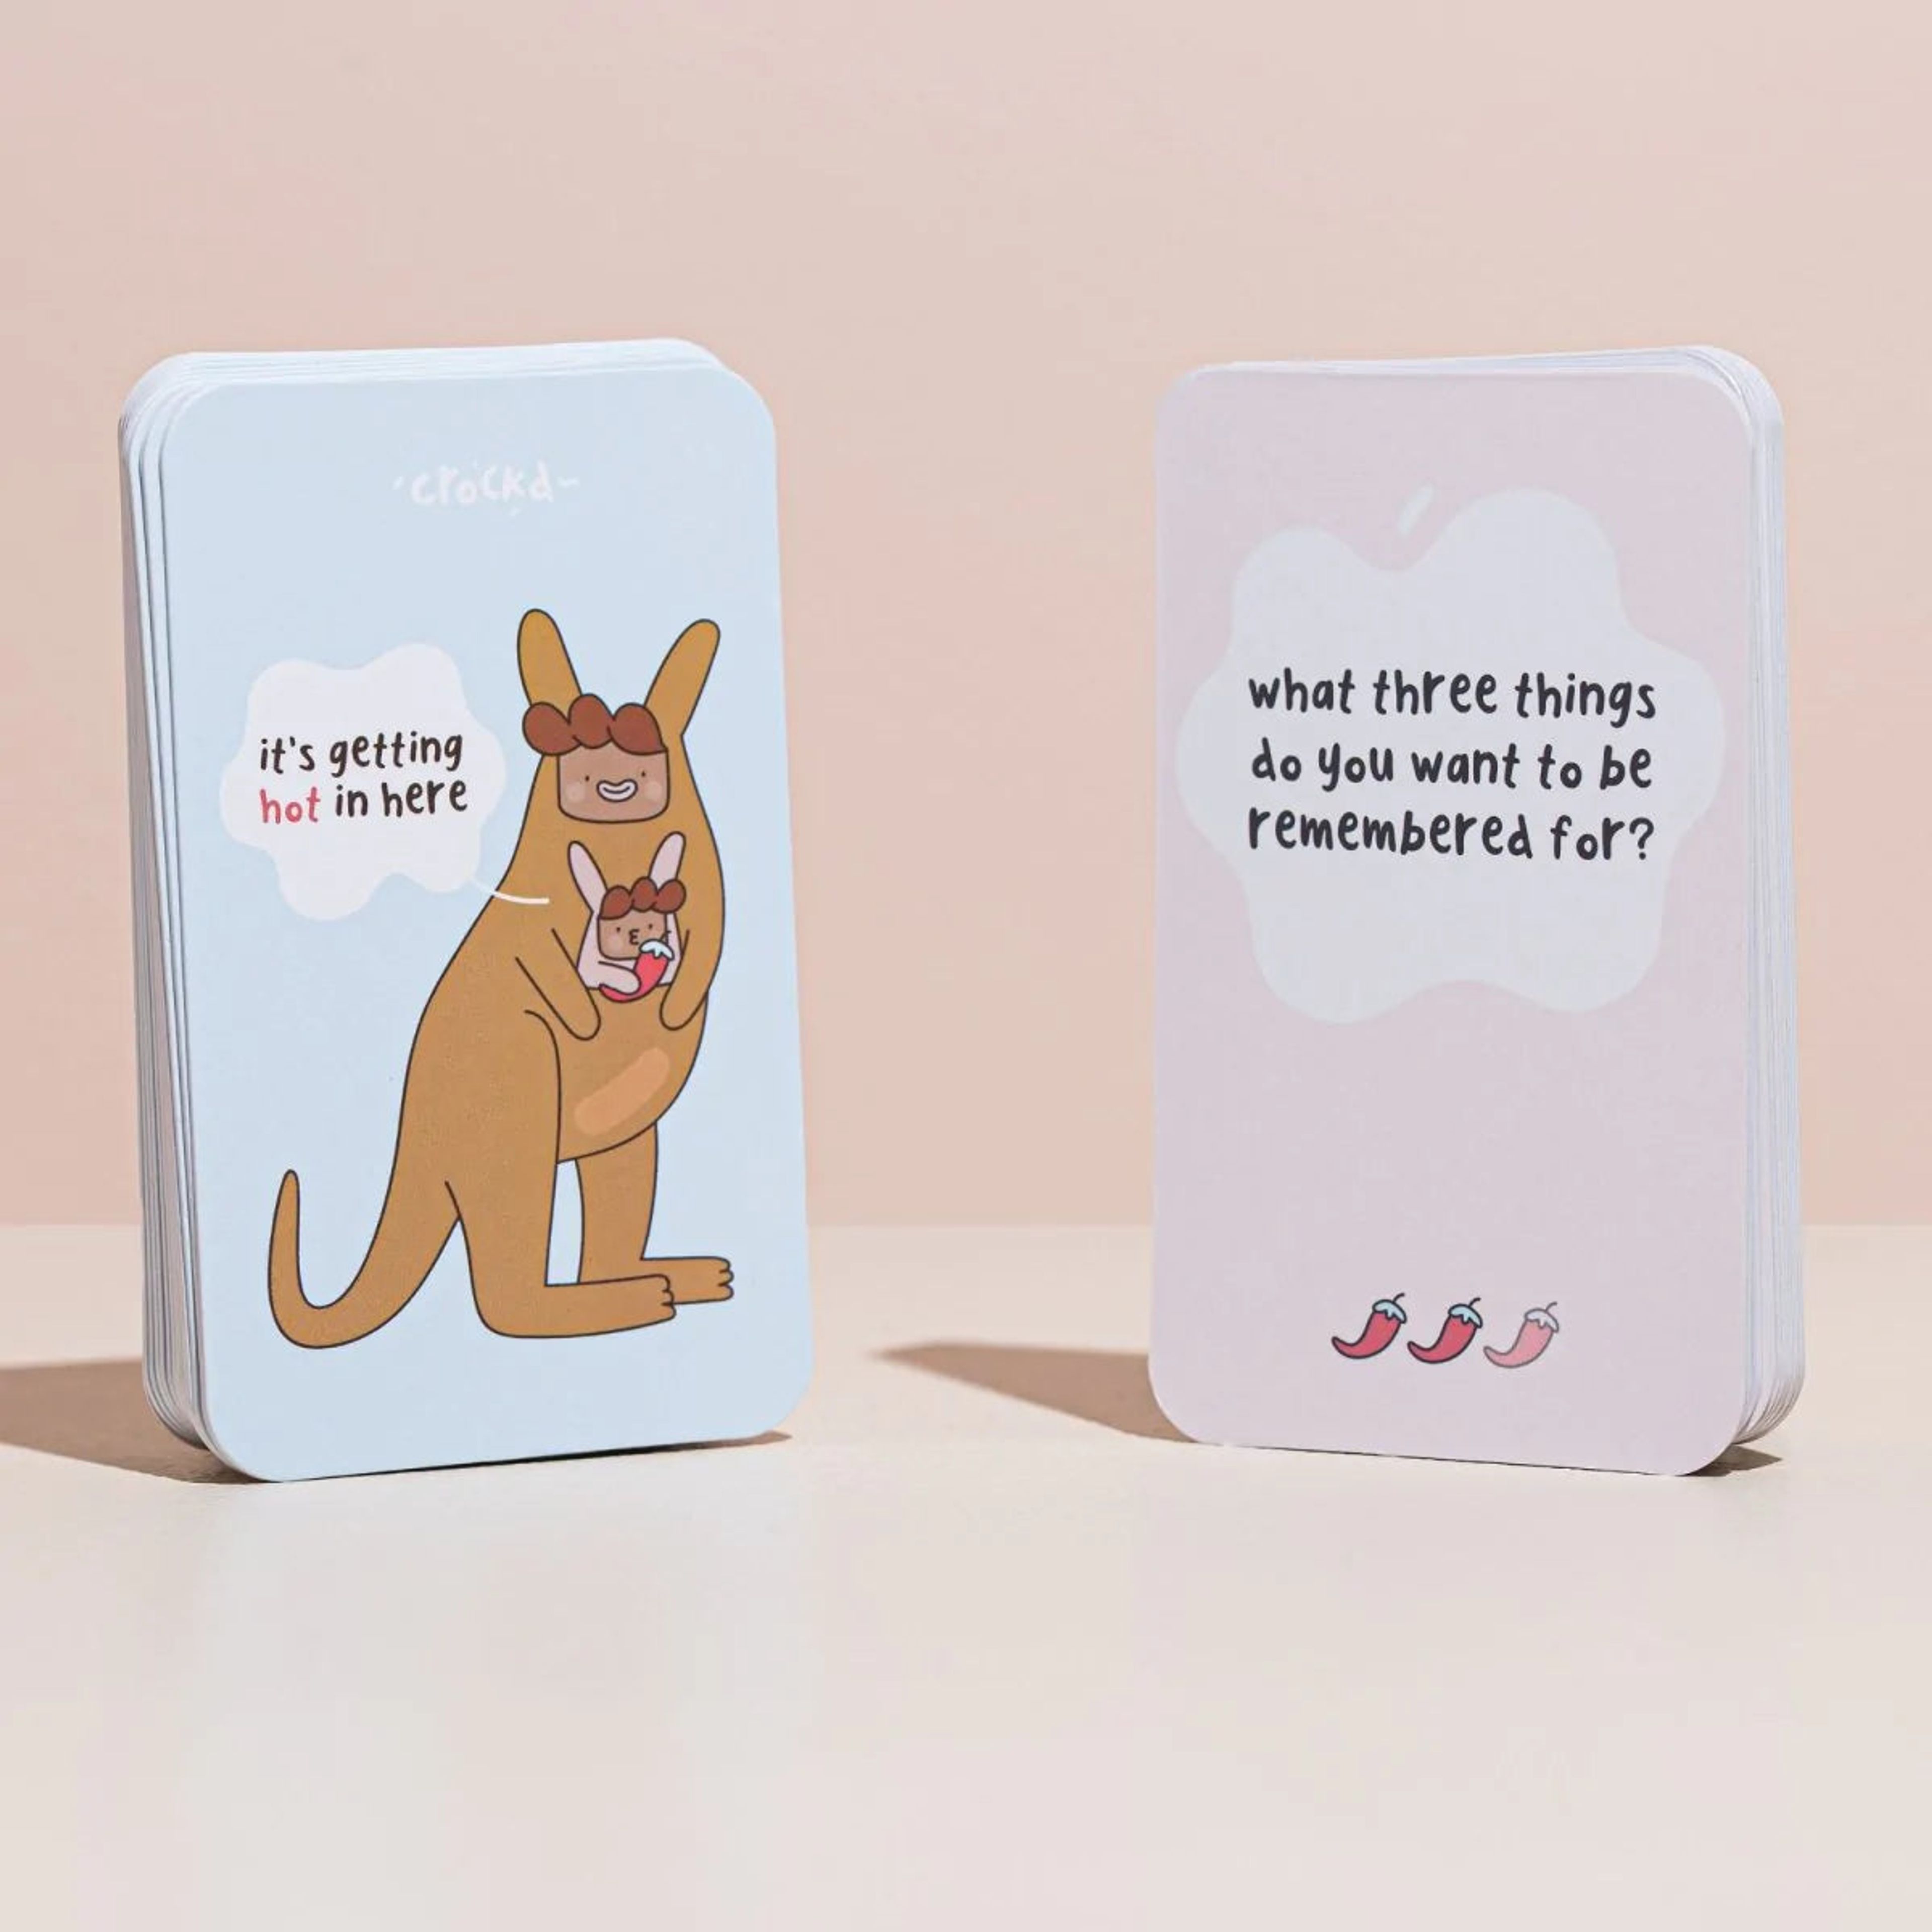 Convo Cards: Spicy Q's for your Mum